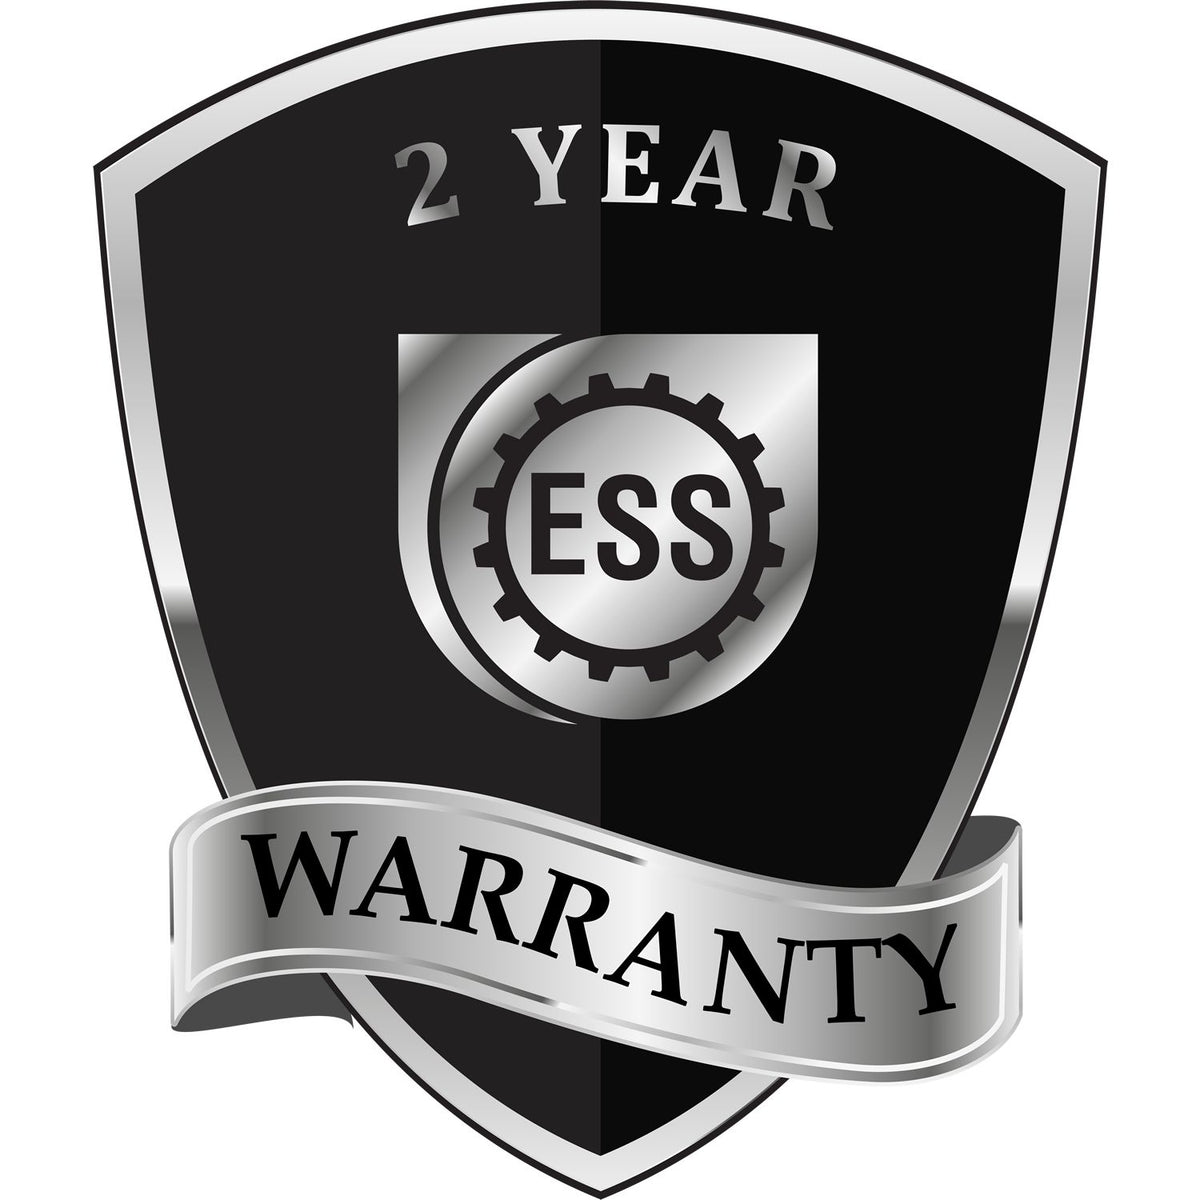 A black and silver badge or emblem showing warranty information for the Long Reach Maine Geology Seal